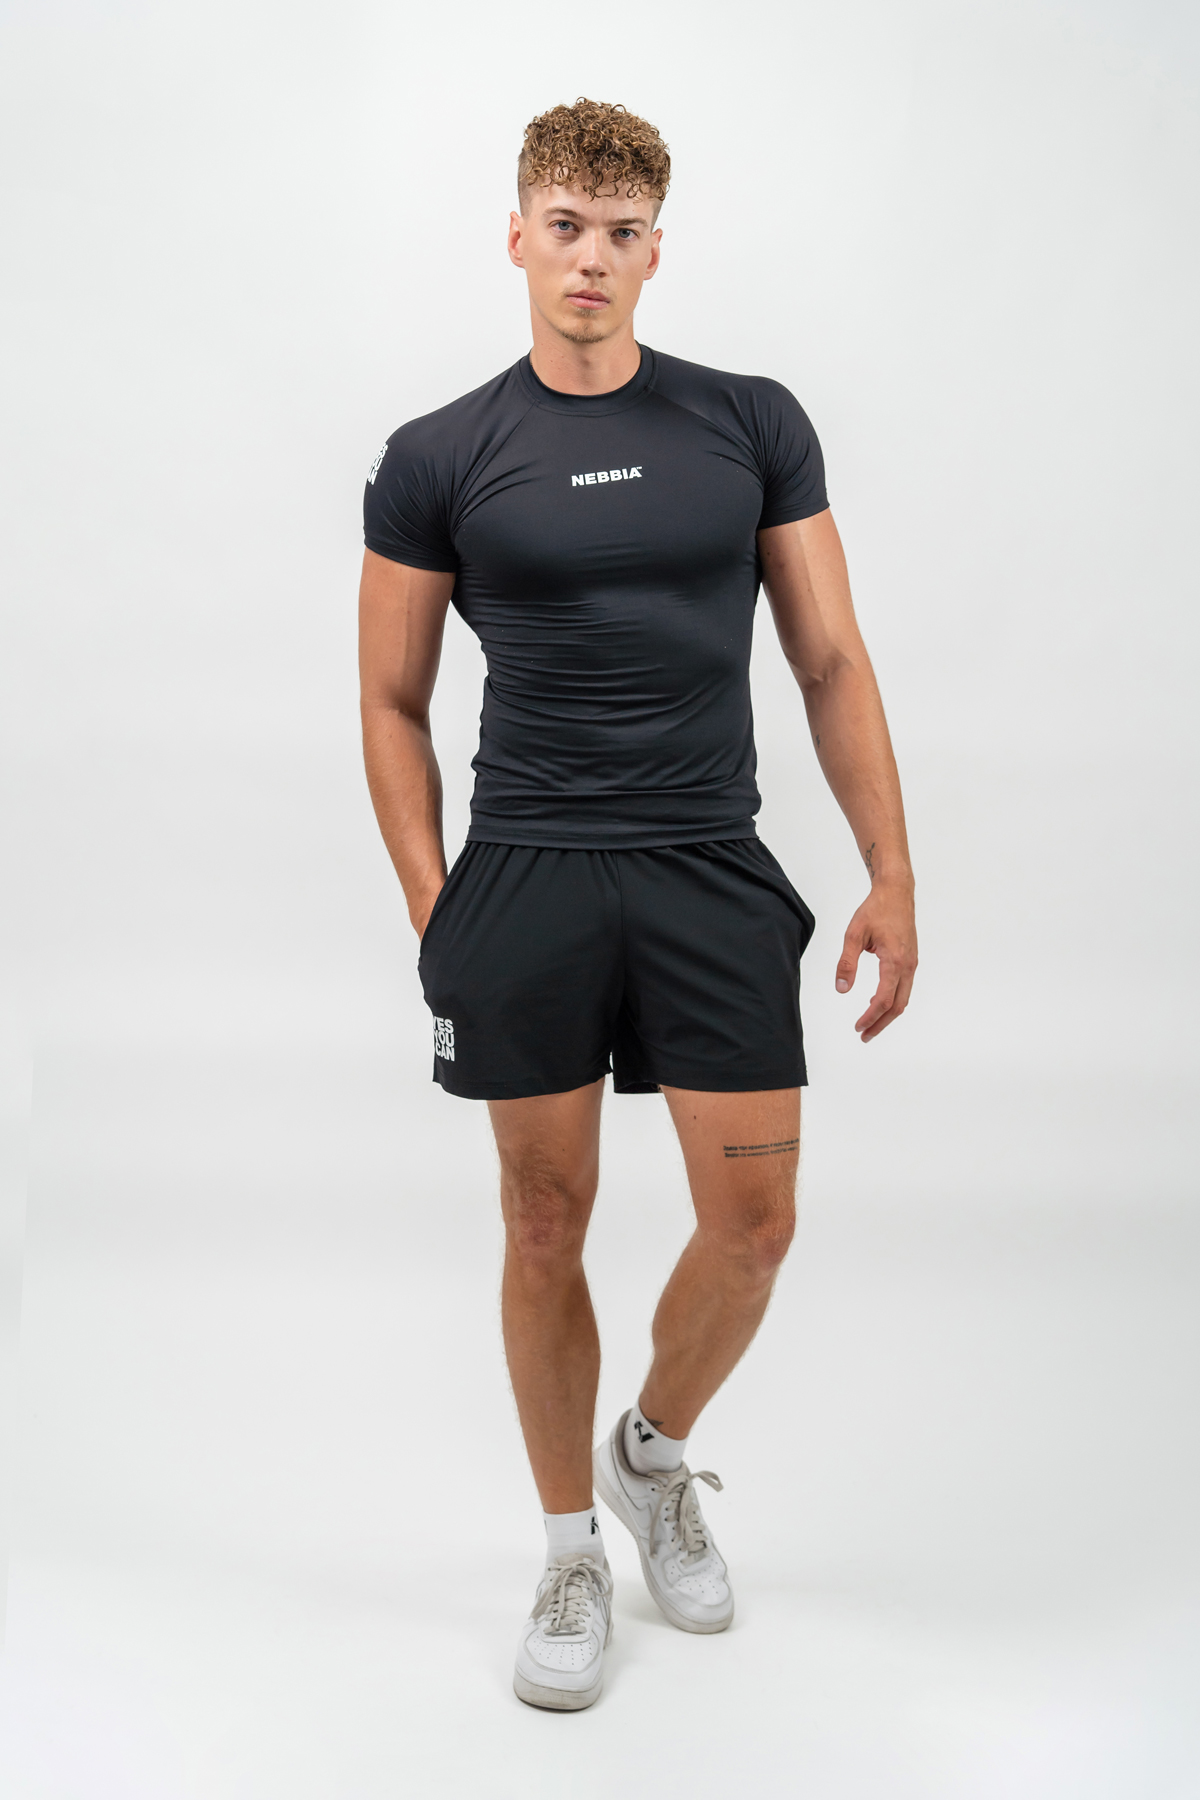 NEBBIA Sports Quick-drying Shorts RESISTANCE